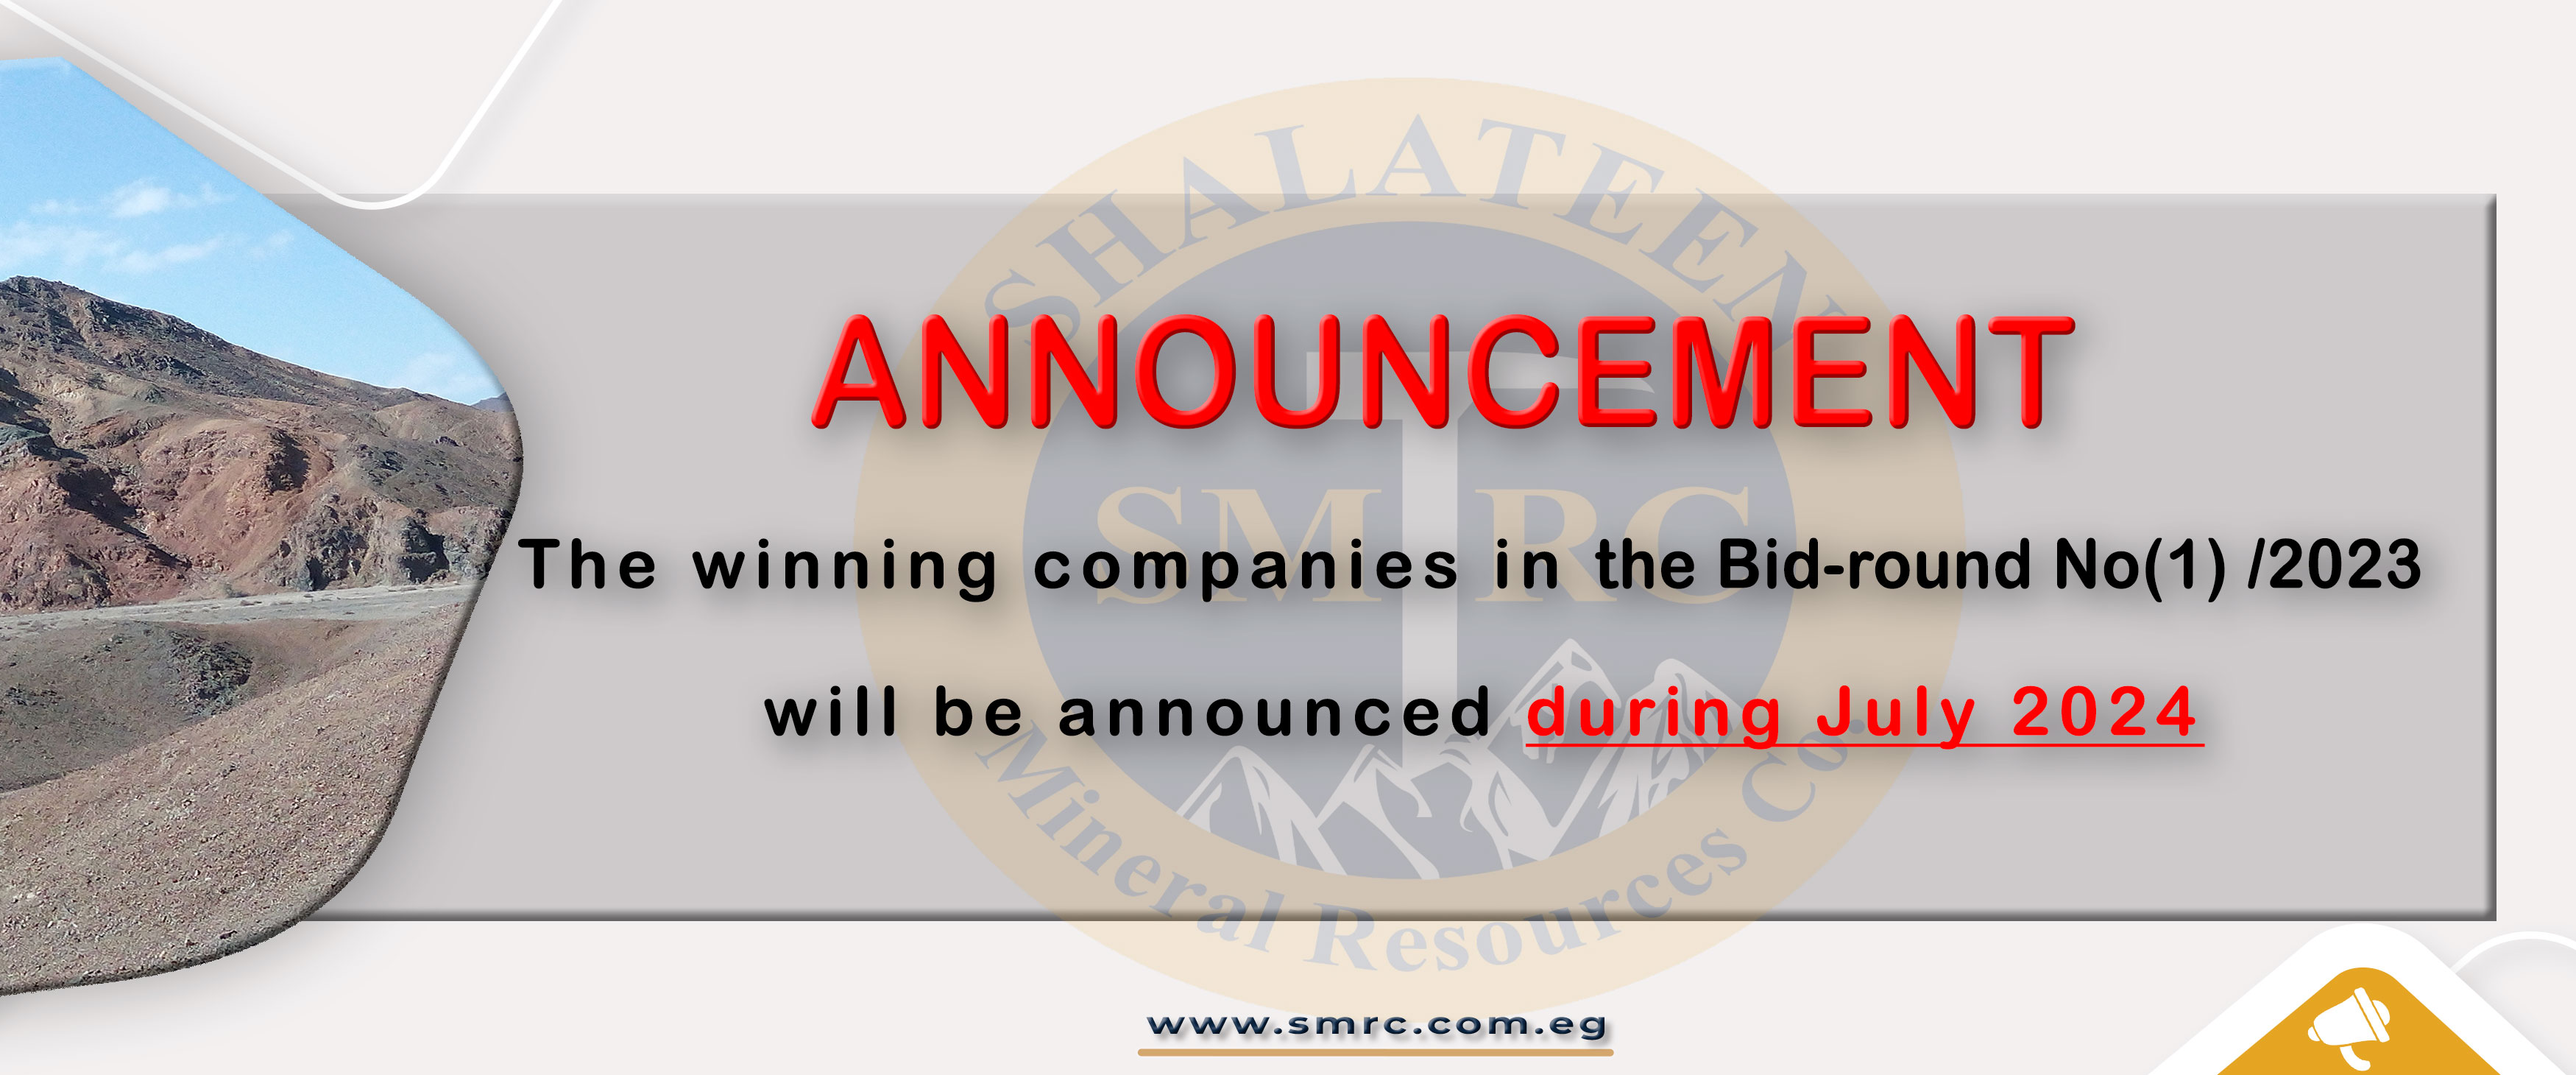 Announcing the winning companies in International Bid round No. (1) for the year 2023